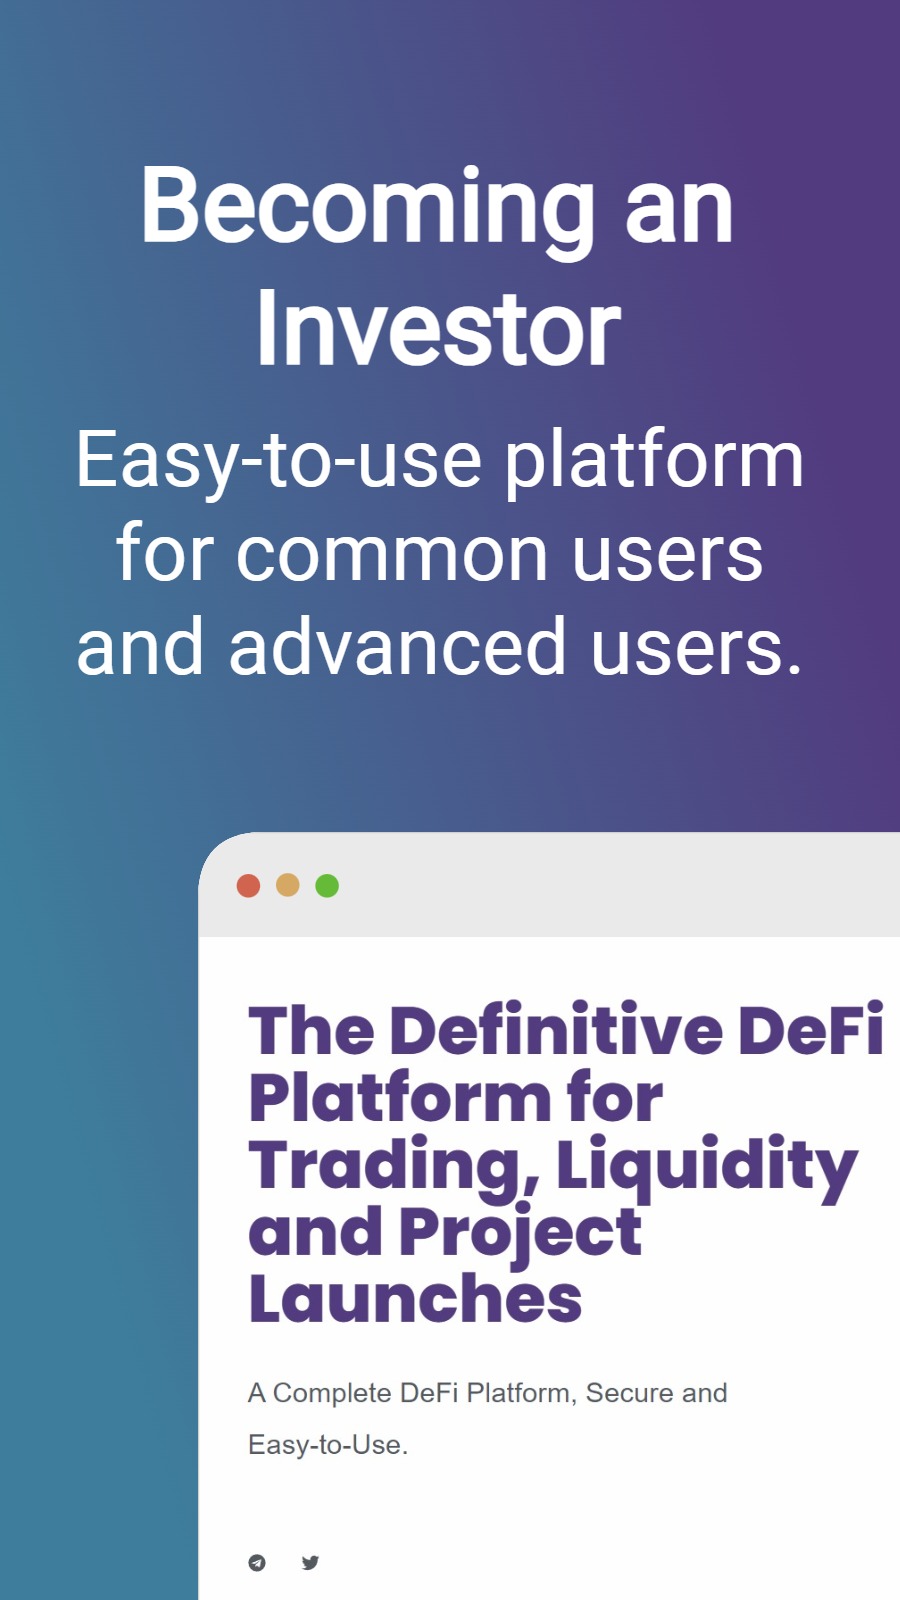 Becoming an Investor - Easy-to-use platform for common users and advanced users.